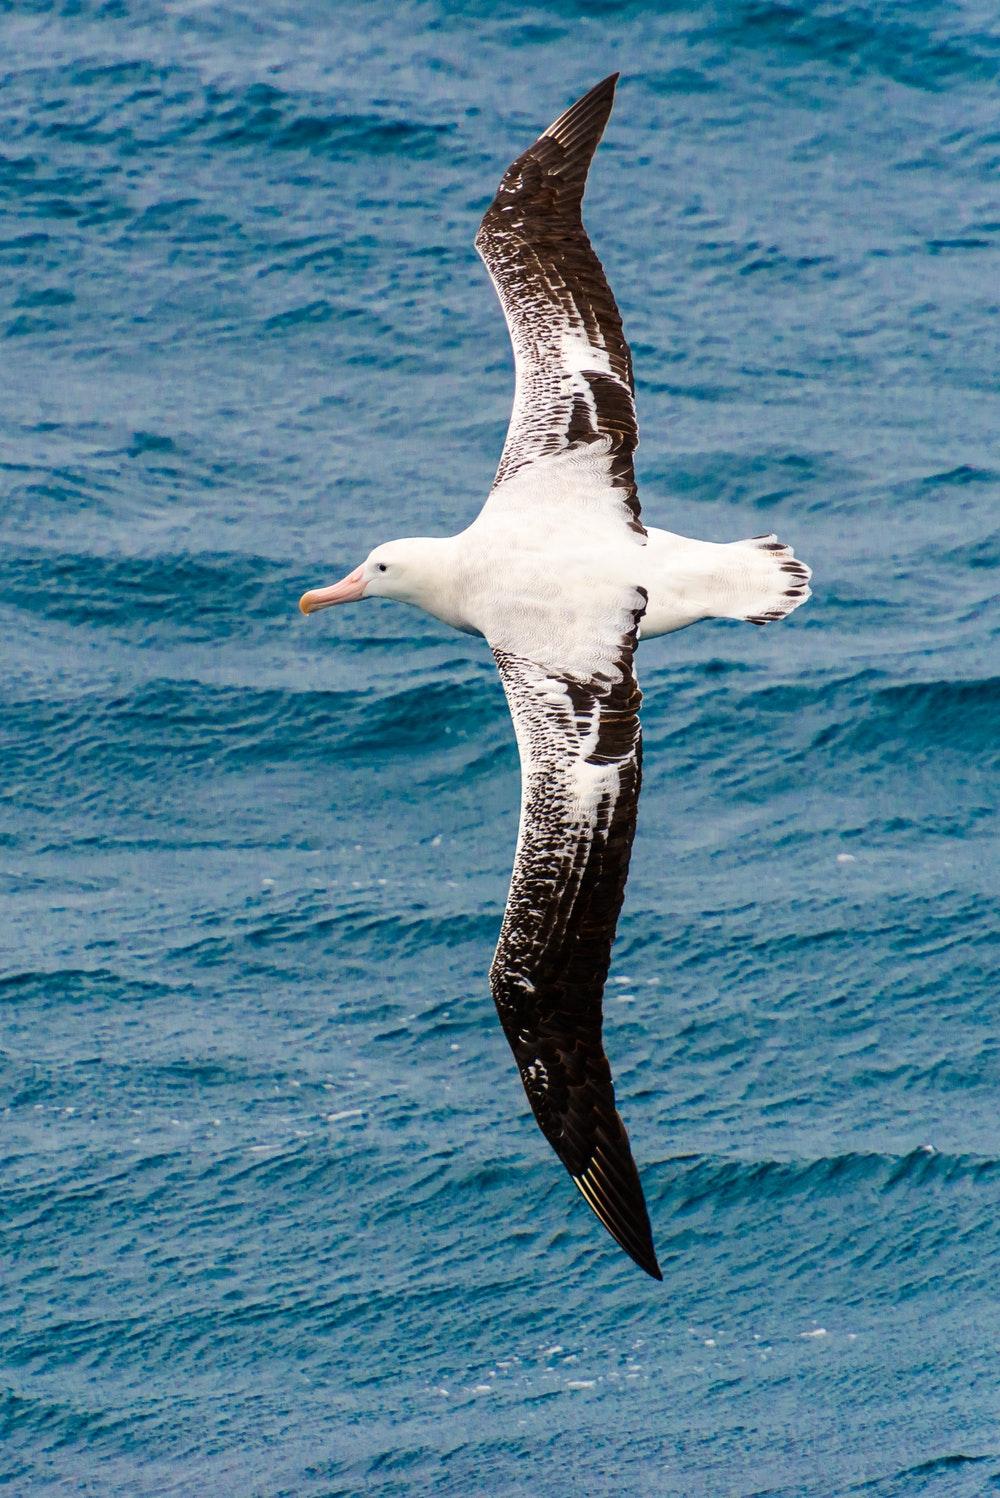 Albatross Picture. Download Free Image